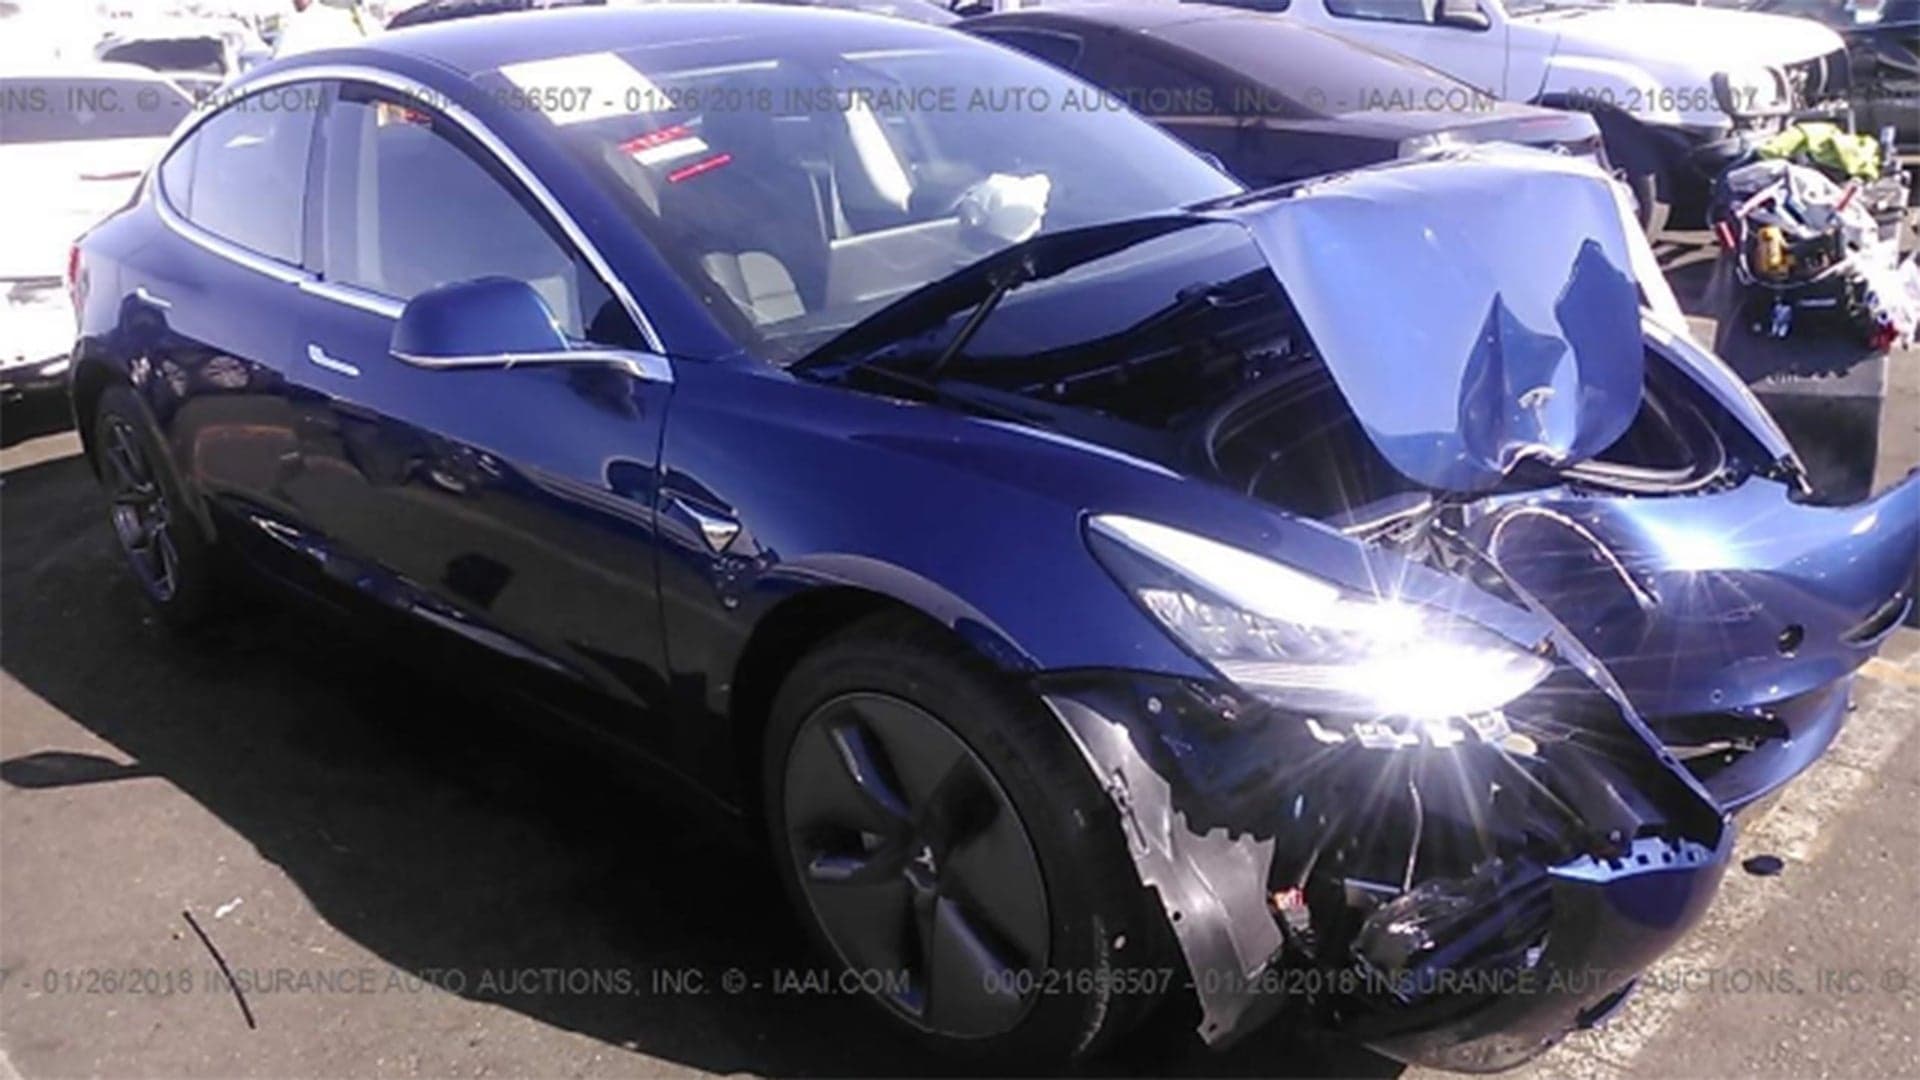 There’s Already a Smashed-Up Tesla Model 3 at a Salvage Auction